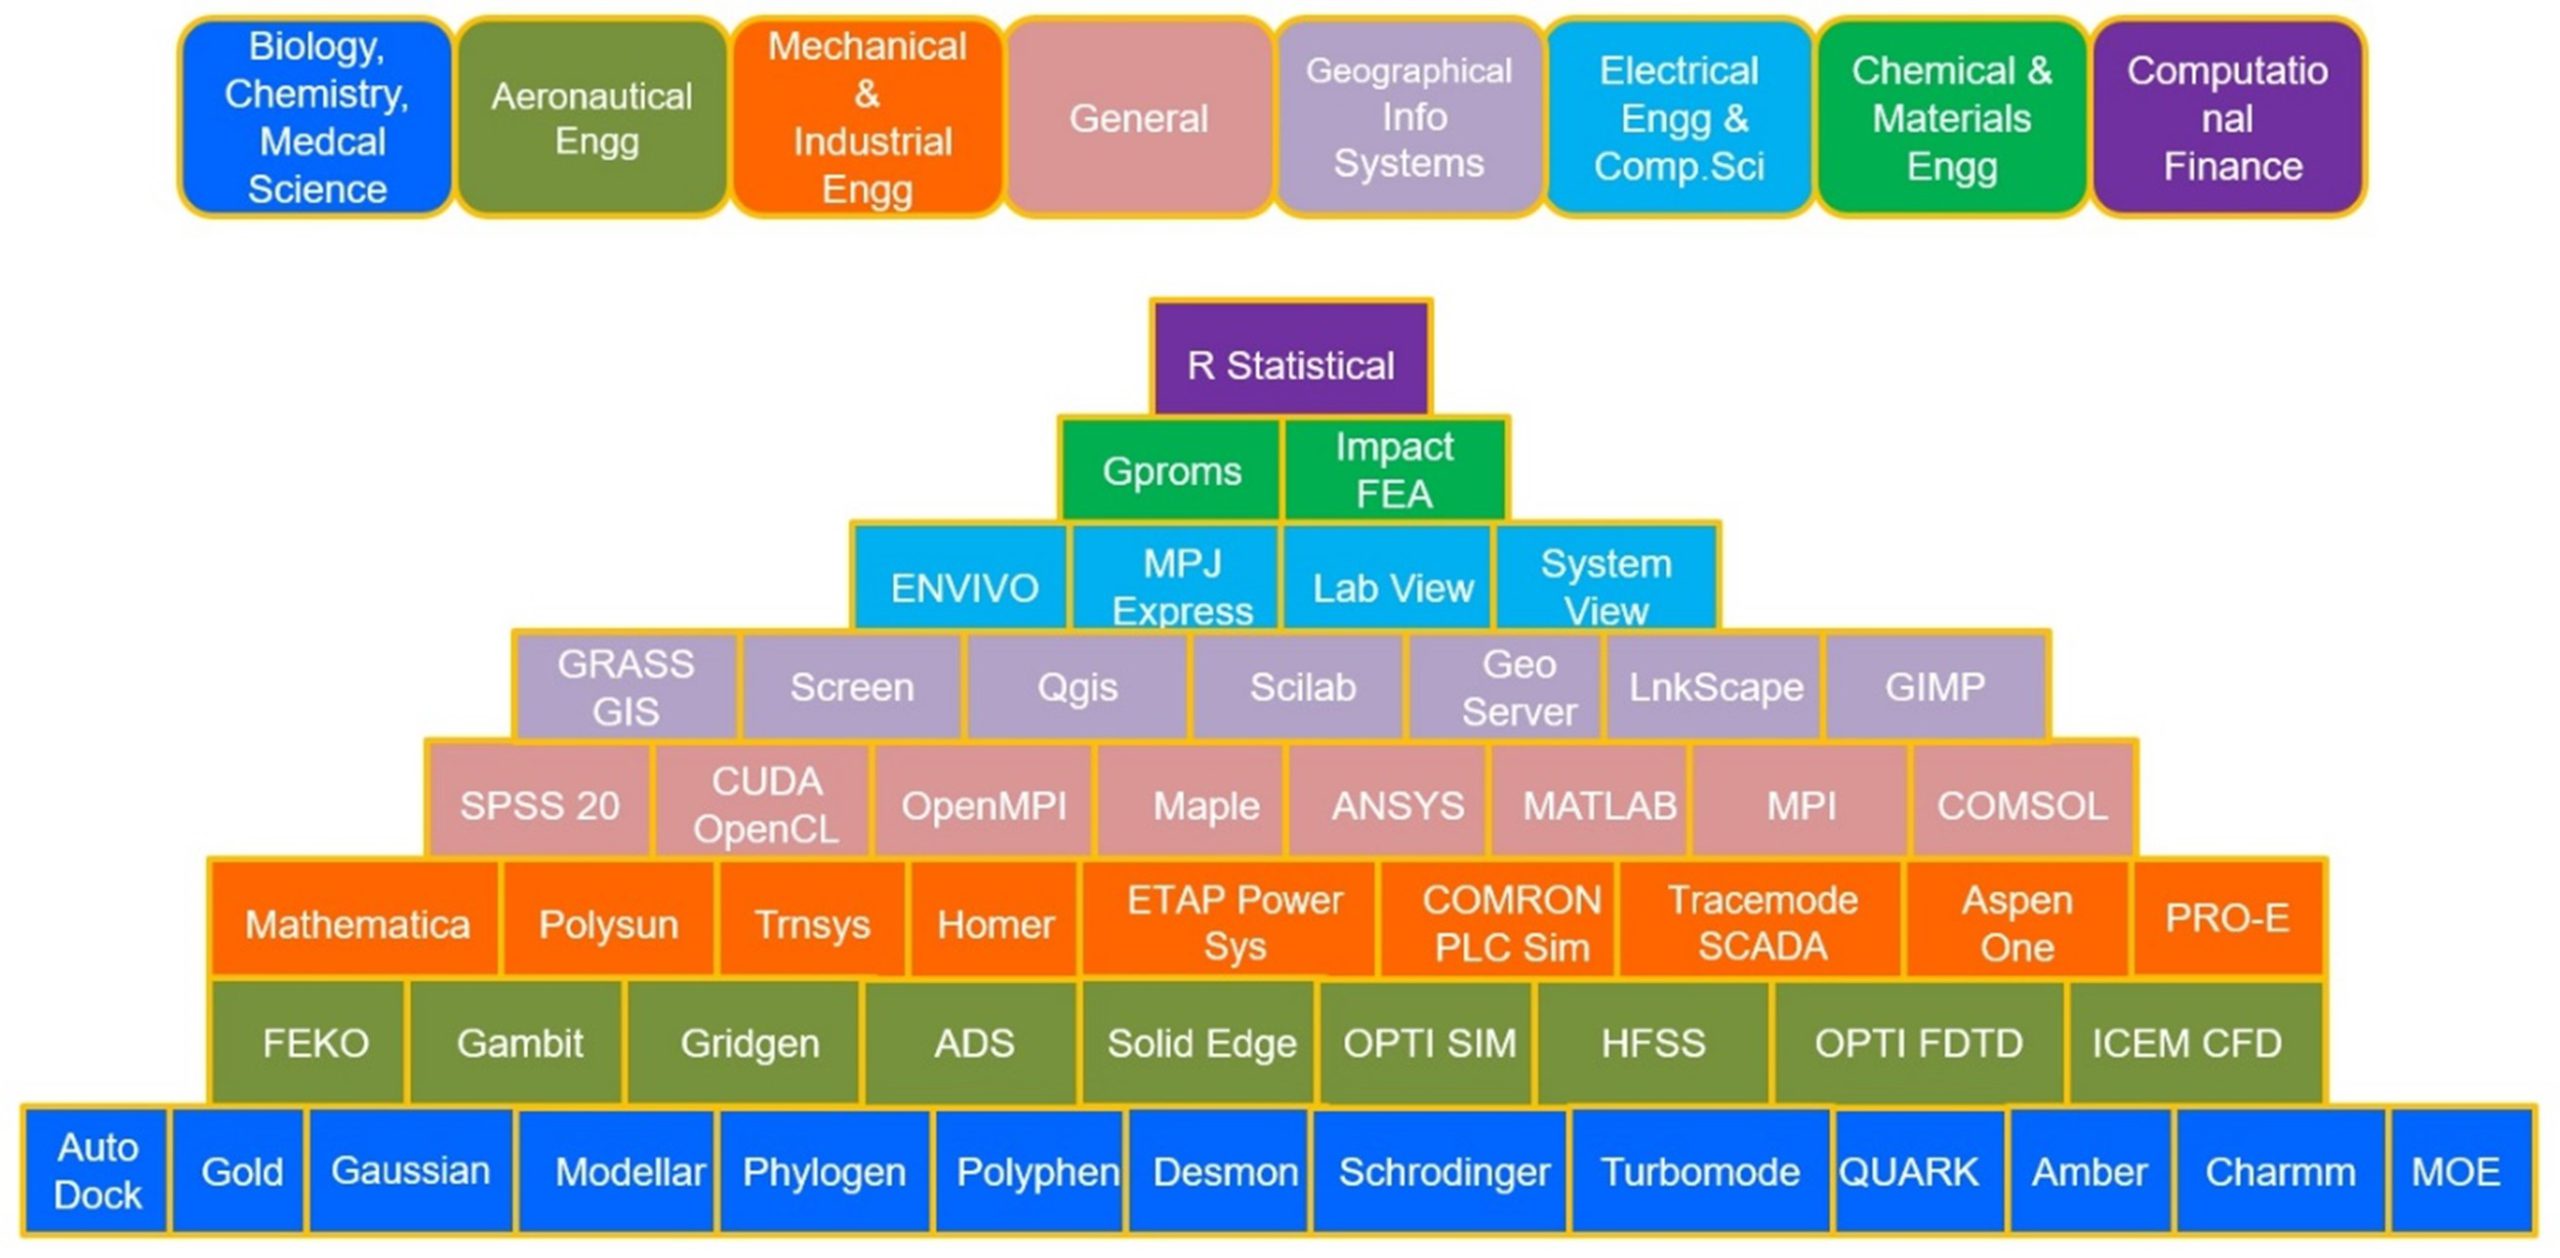 Figure 3. Software packages and Libraries installed on HPC Clusters